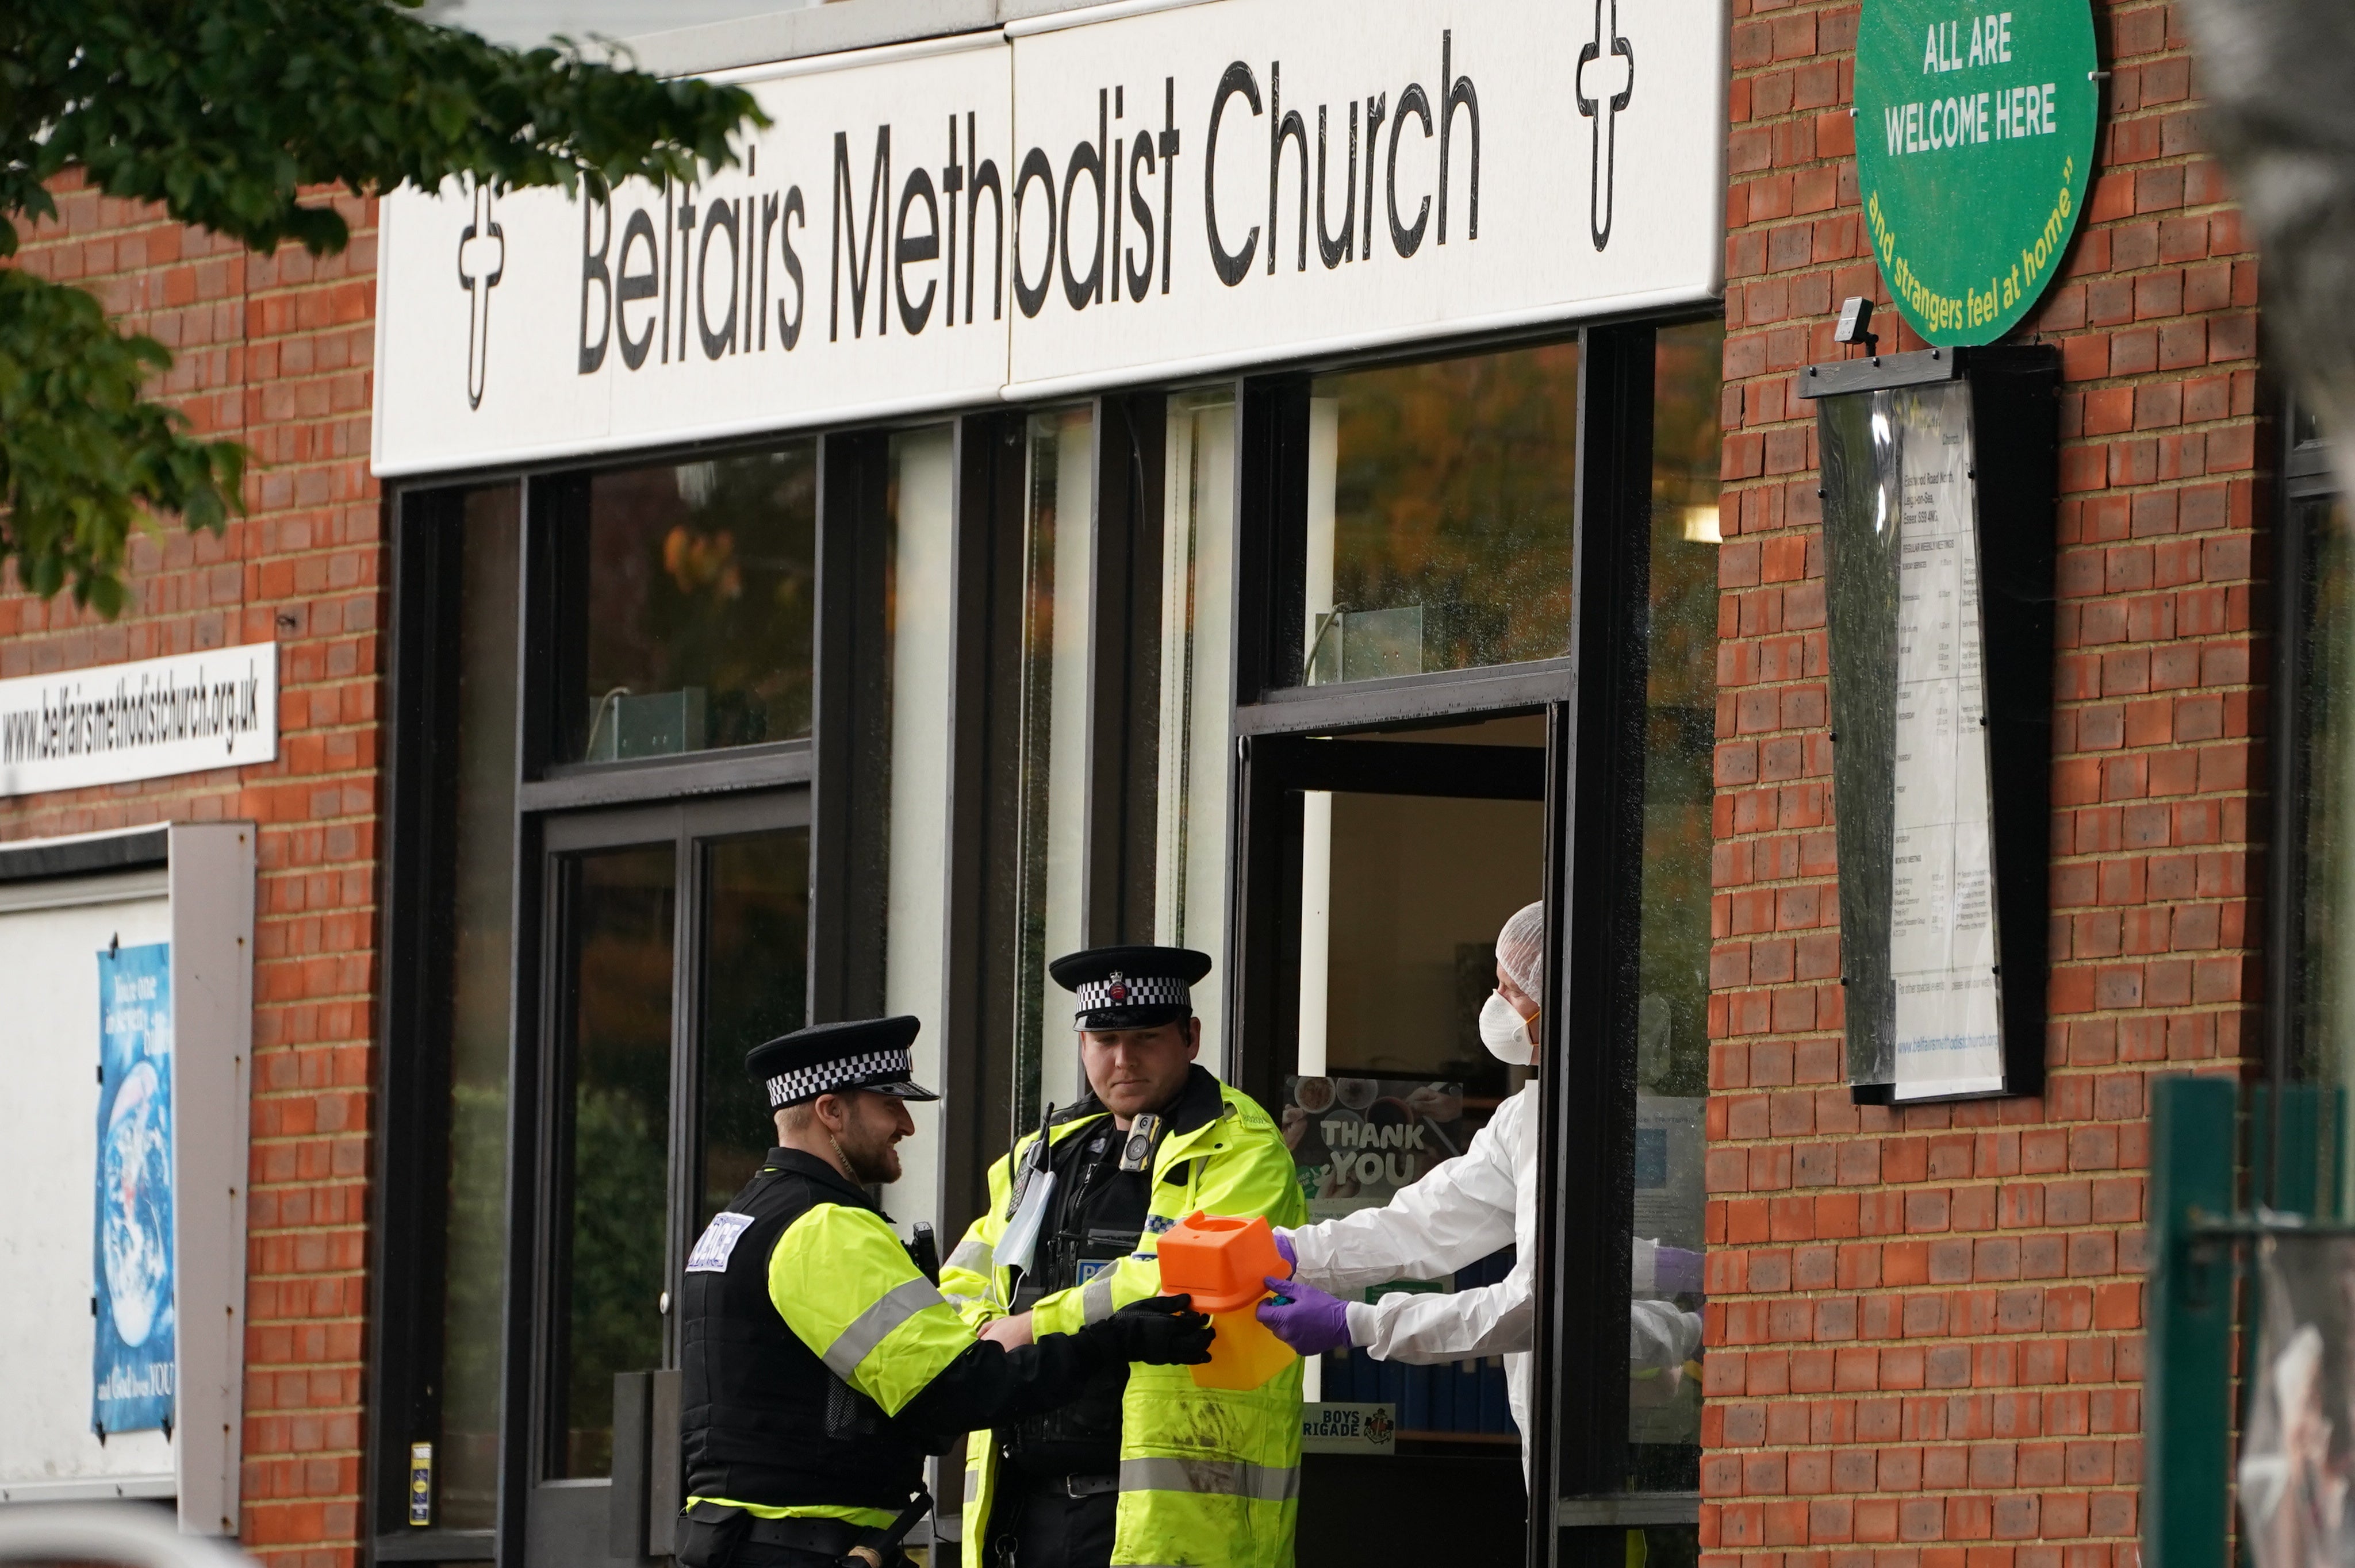 Forensic officers and police at Belfairs Methodist Church (PA)